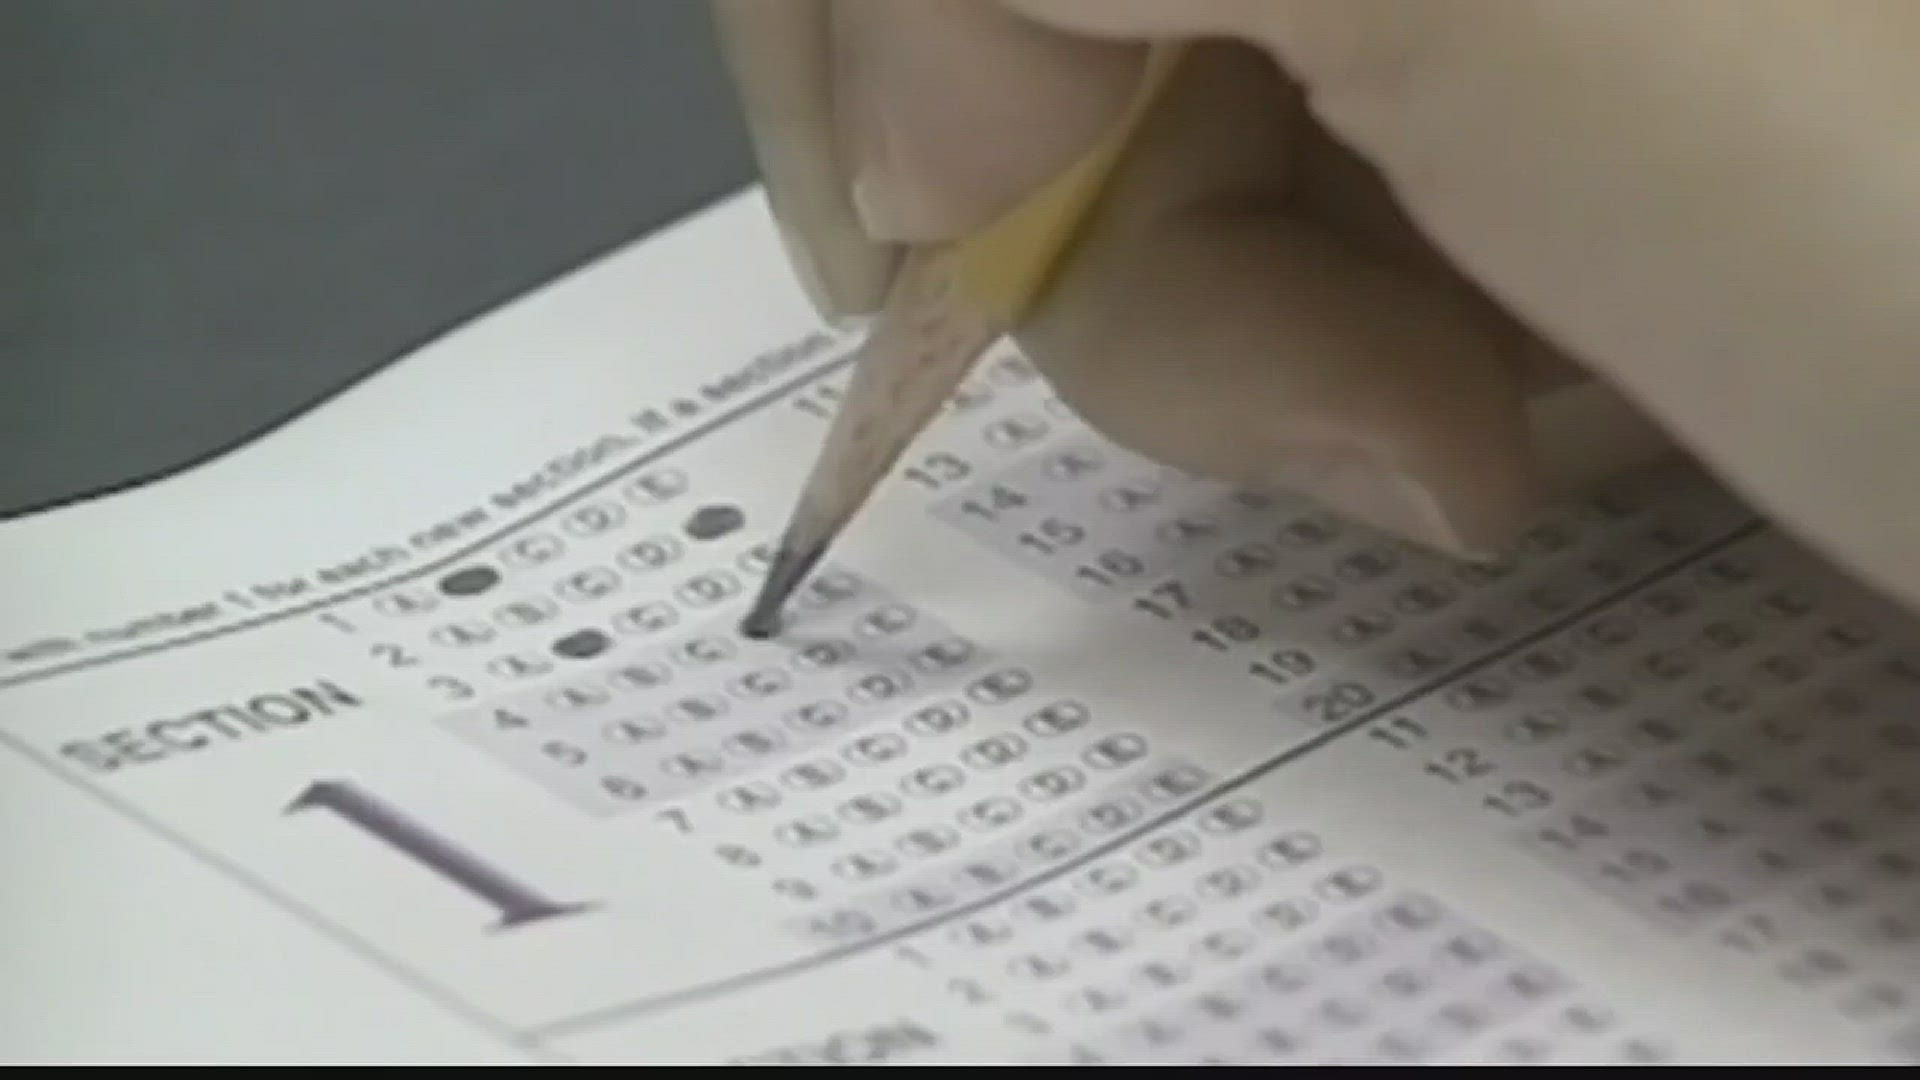 State exams begin today and waiting to hear the percentage of opt-out rates now